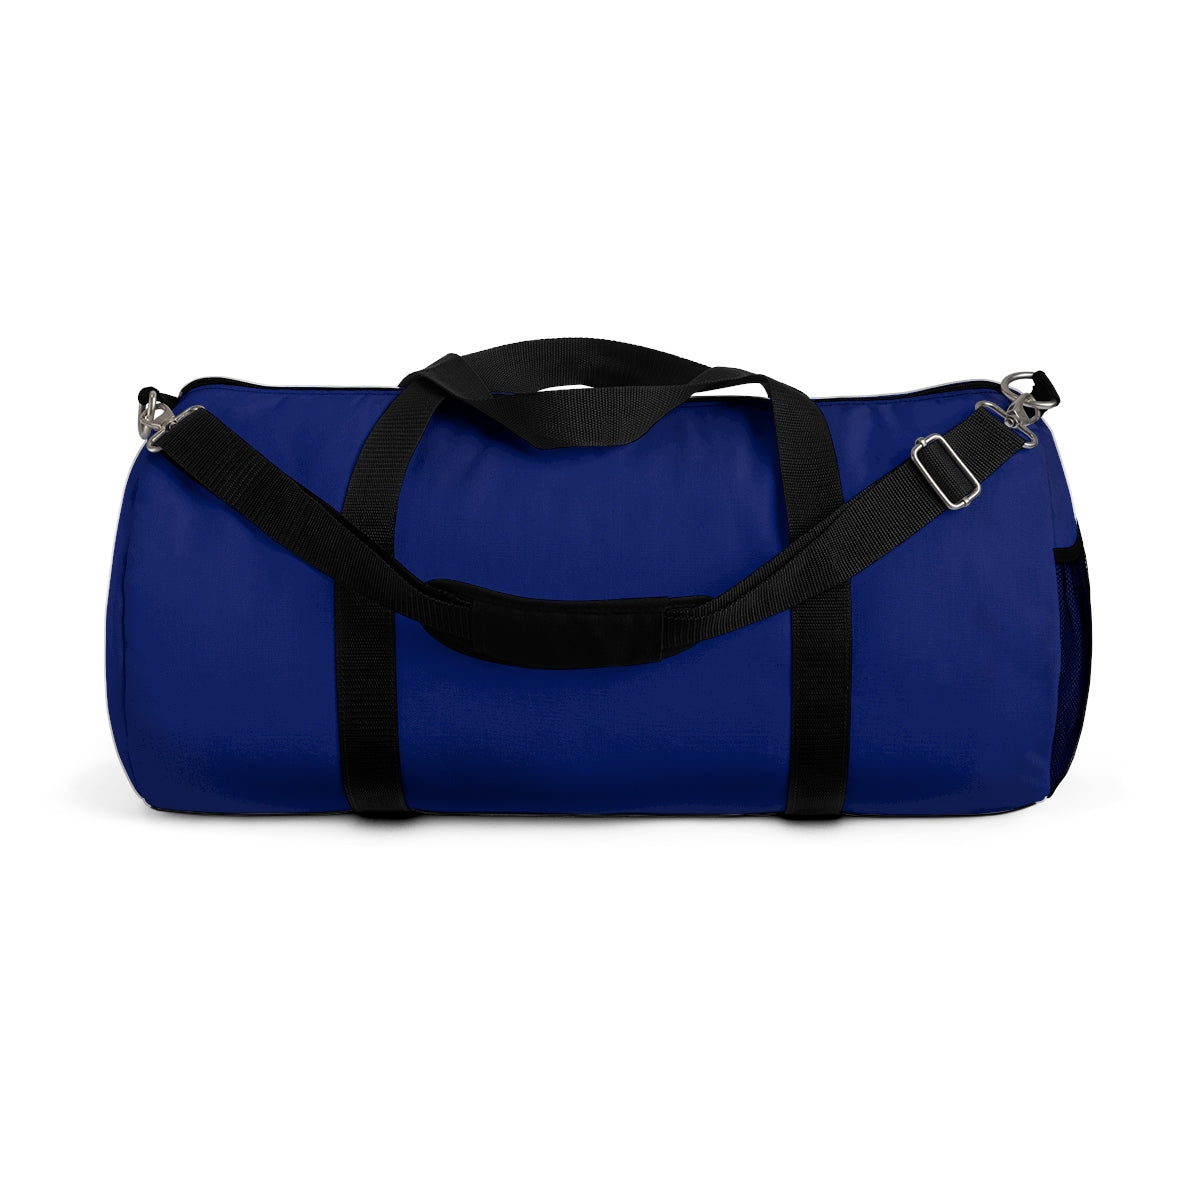 Military Blue Solid Color All Day Small Or Large Size Duffel Bag, Made in USA-Duffel Bag-Small-Heidi Kimura Art LLC